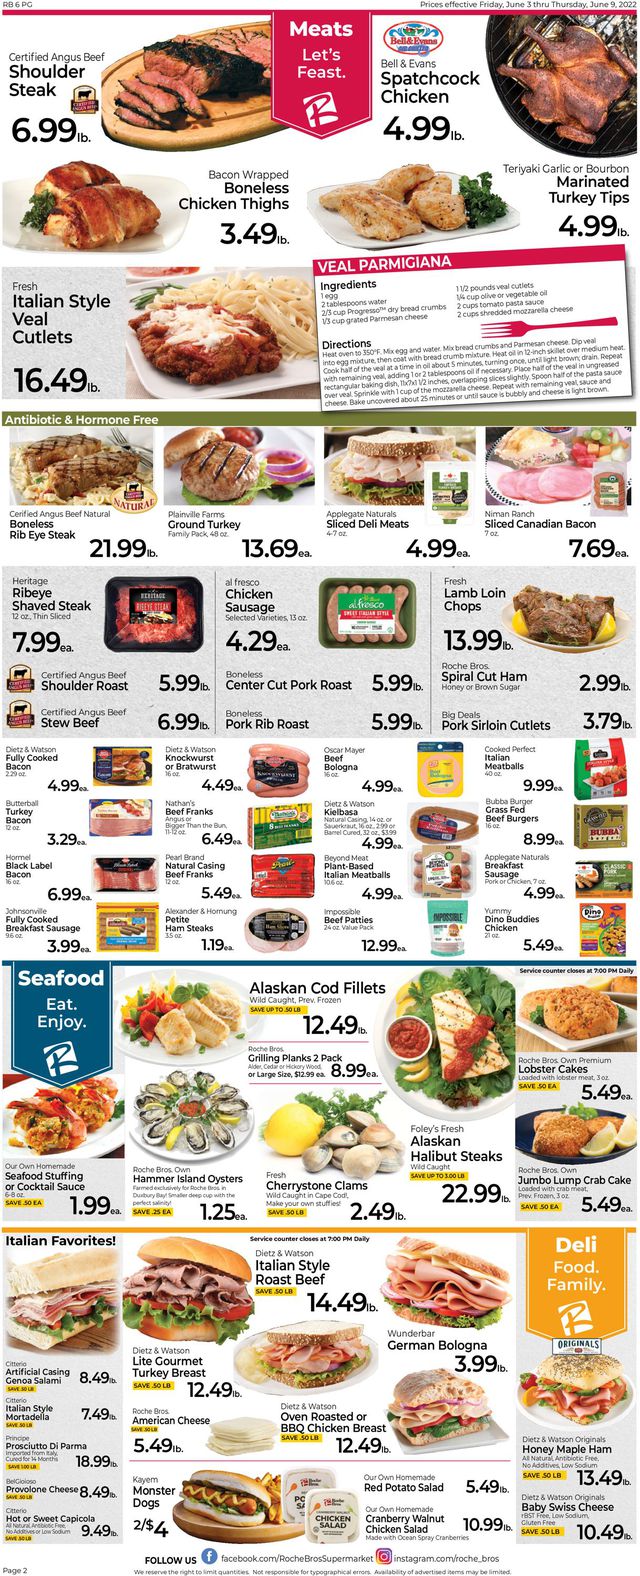 Roche Bros. Supermarkets Ad from 06/03/2022